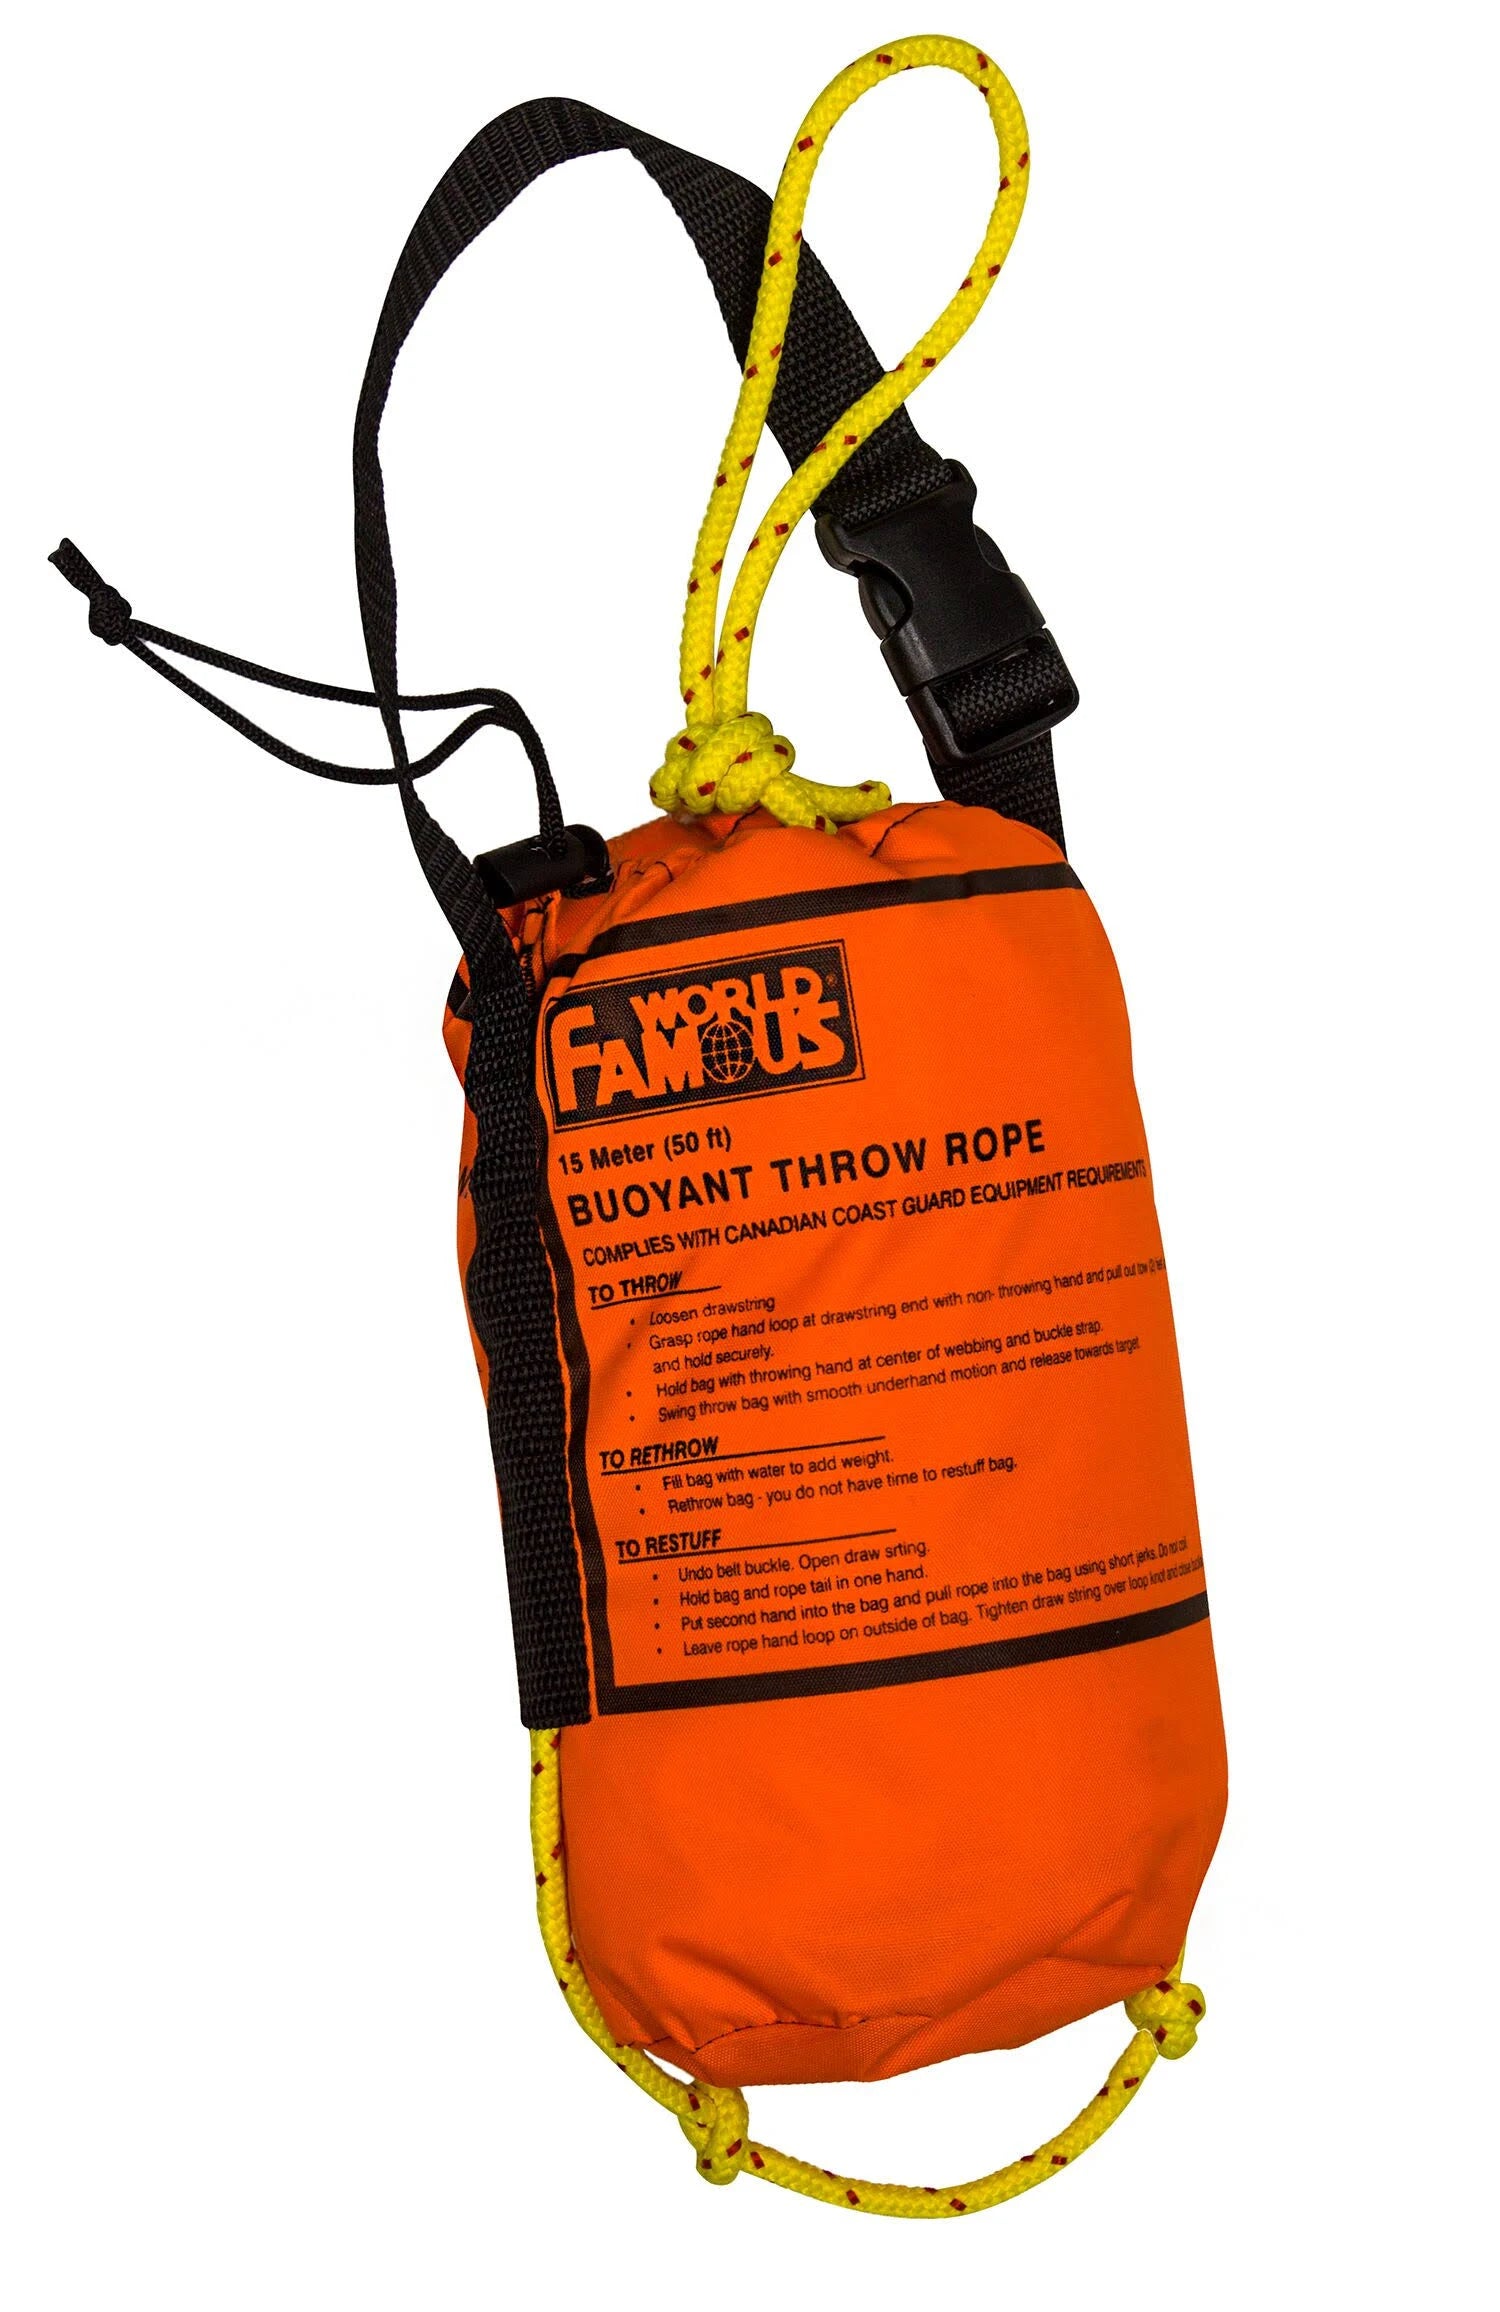 World Famous Rescue Throw Rope Bag - ScoutTech